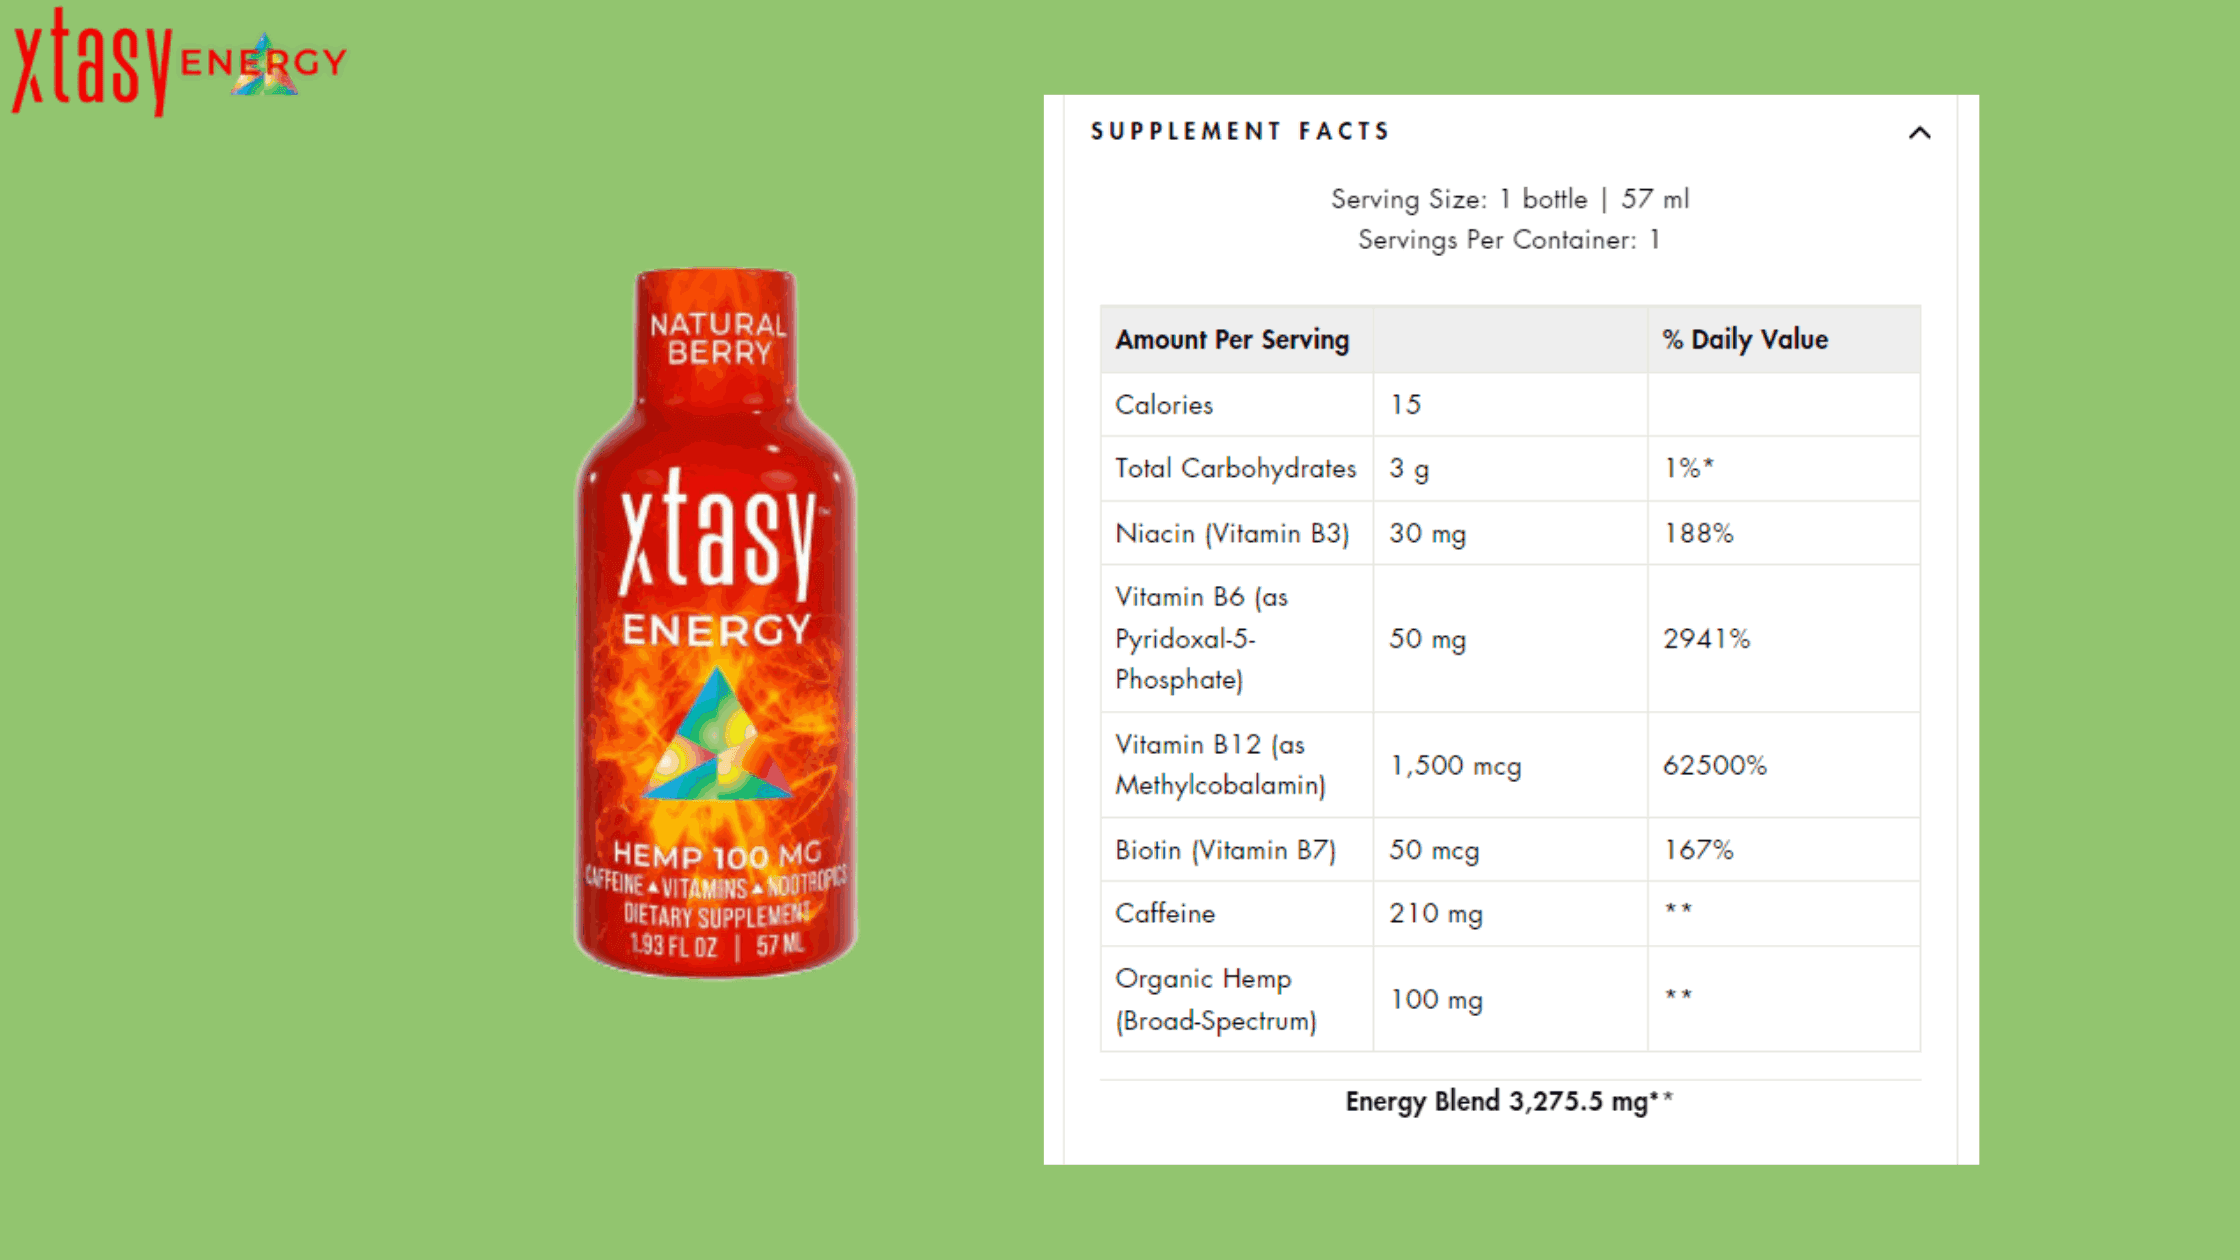  Xtasy Energy supplement facts